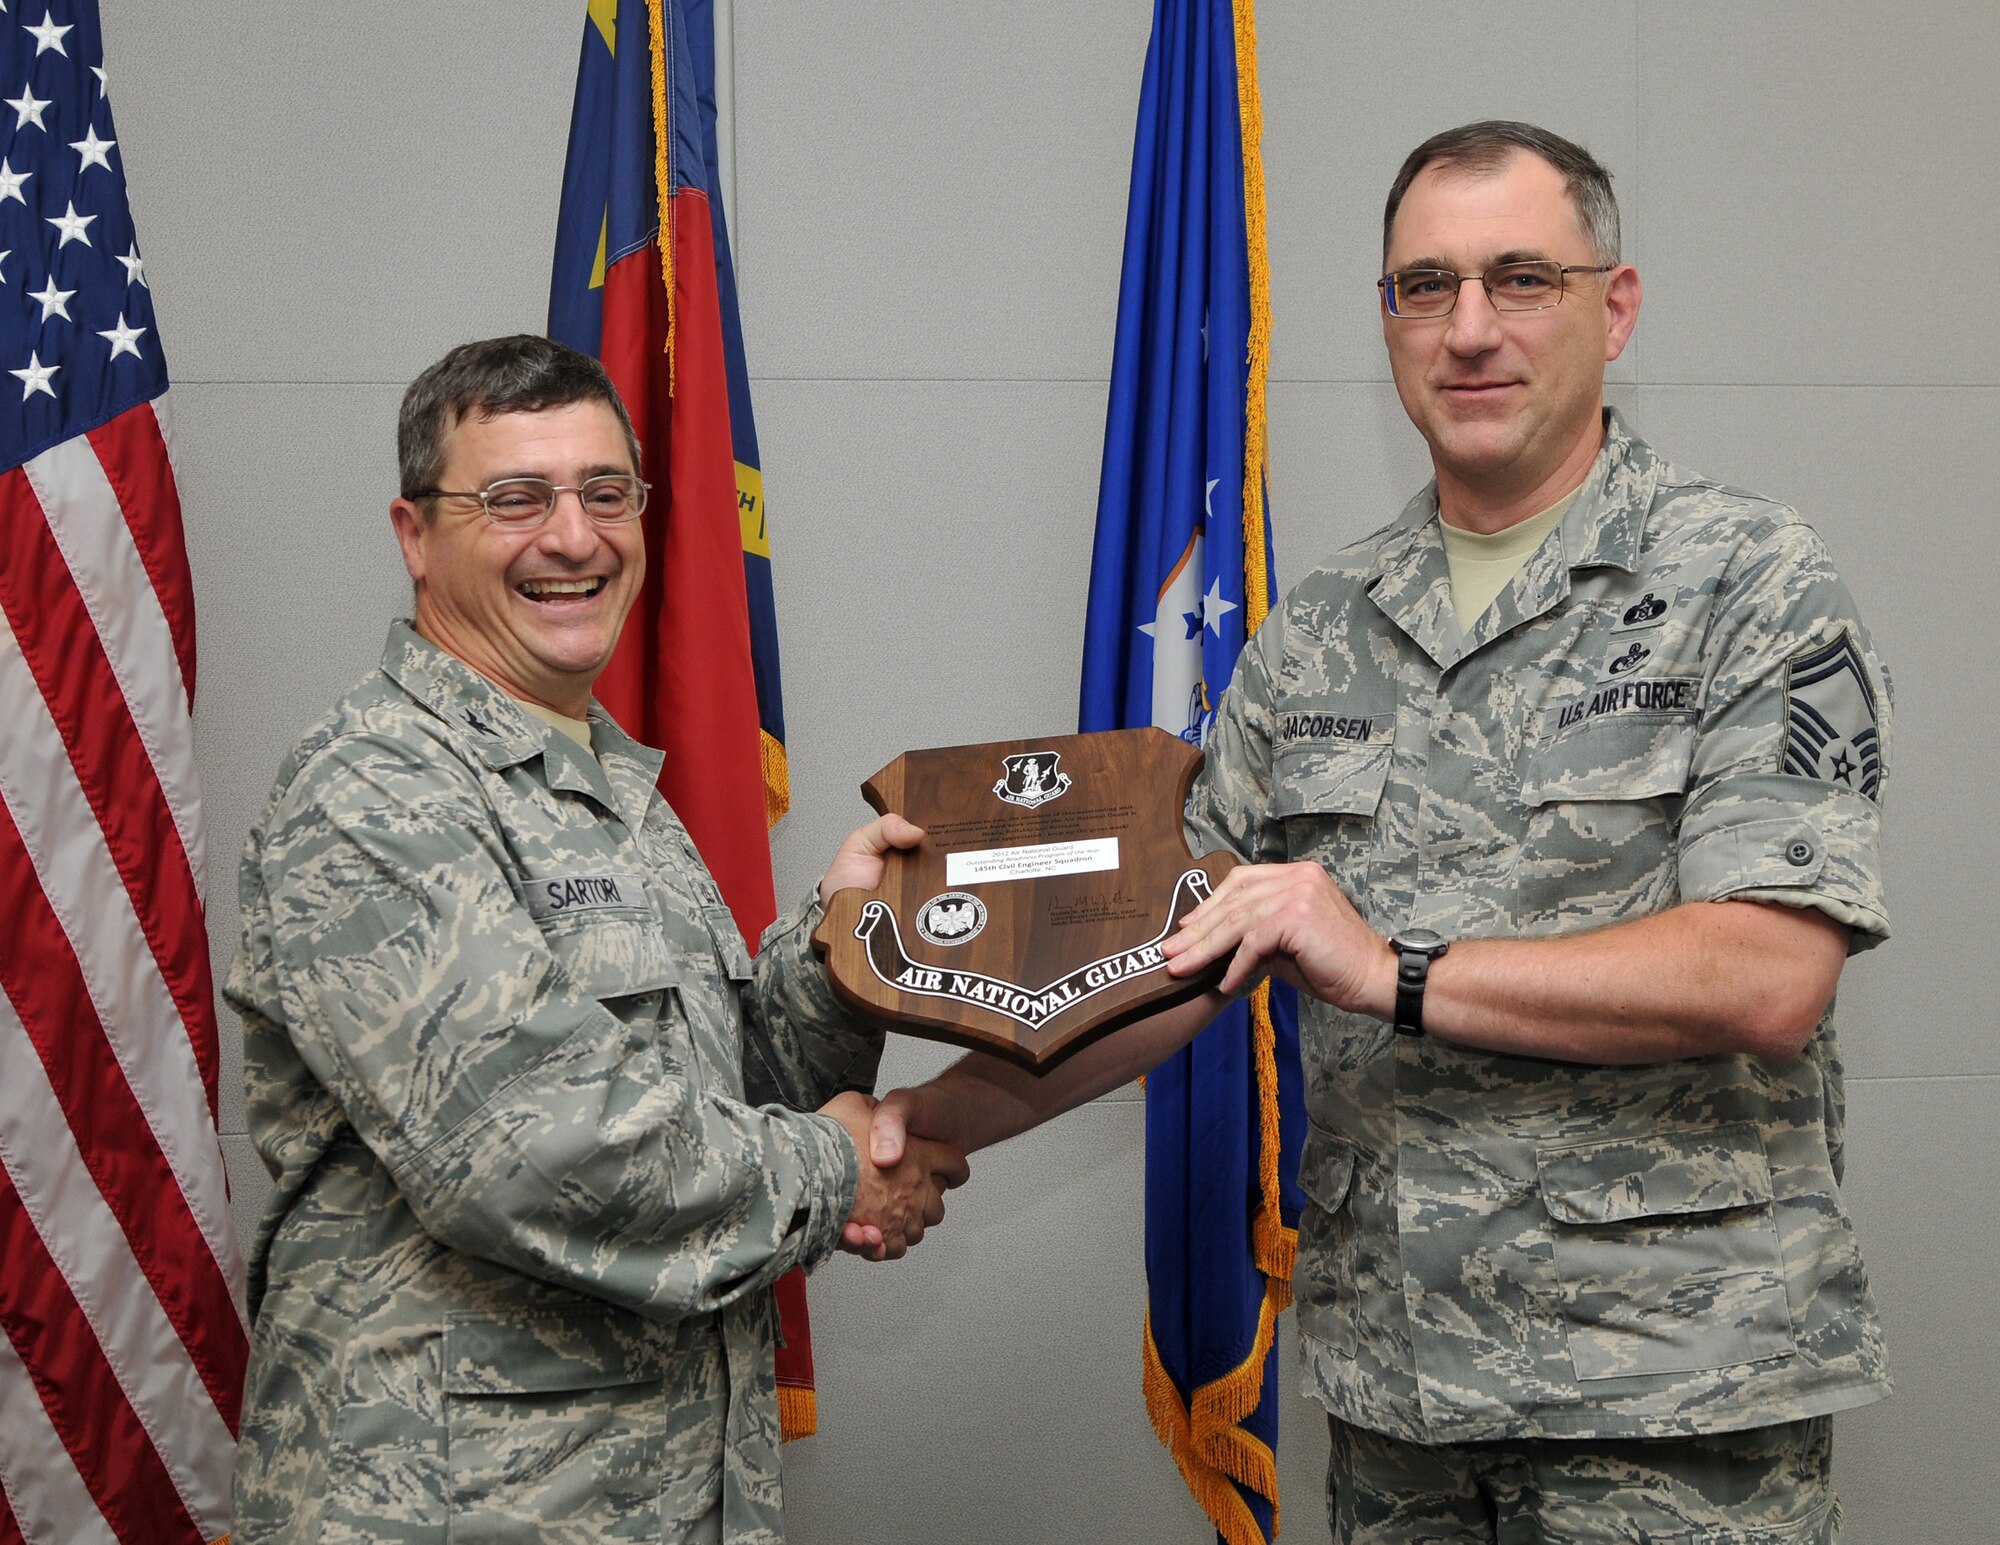 On May 16, 2013, Air Force Col. Peter “Puck” Sartori, Director of Installations and Mission Support and The Civil Engineer for the Air National Guard at Joint Base Andrews, Maryland, visited the 145th Airlift Wing, North Carolina Air National Guard base to present the Colonel Fredrick J. Riemer Award to Senior Master Sgt. Kenneth Jacobson, Emergency Management Flight Superintendent, 145th Civil Engineering Squadron. This annual award is in recognition of the best CE Readiness Flight from all Air Reserve components in the United States that best demonstrates exemplary performance in support of the engineer readiness mission. (U.S. Air National Guard photo by Tech. Sgt. Patricia Findley/Released)